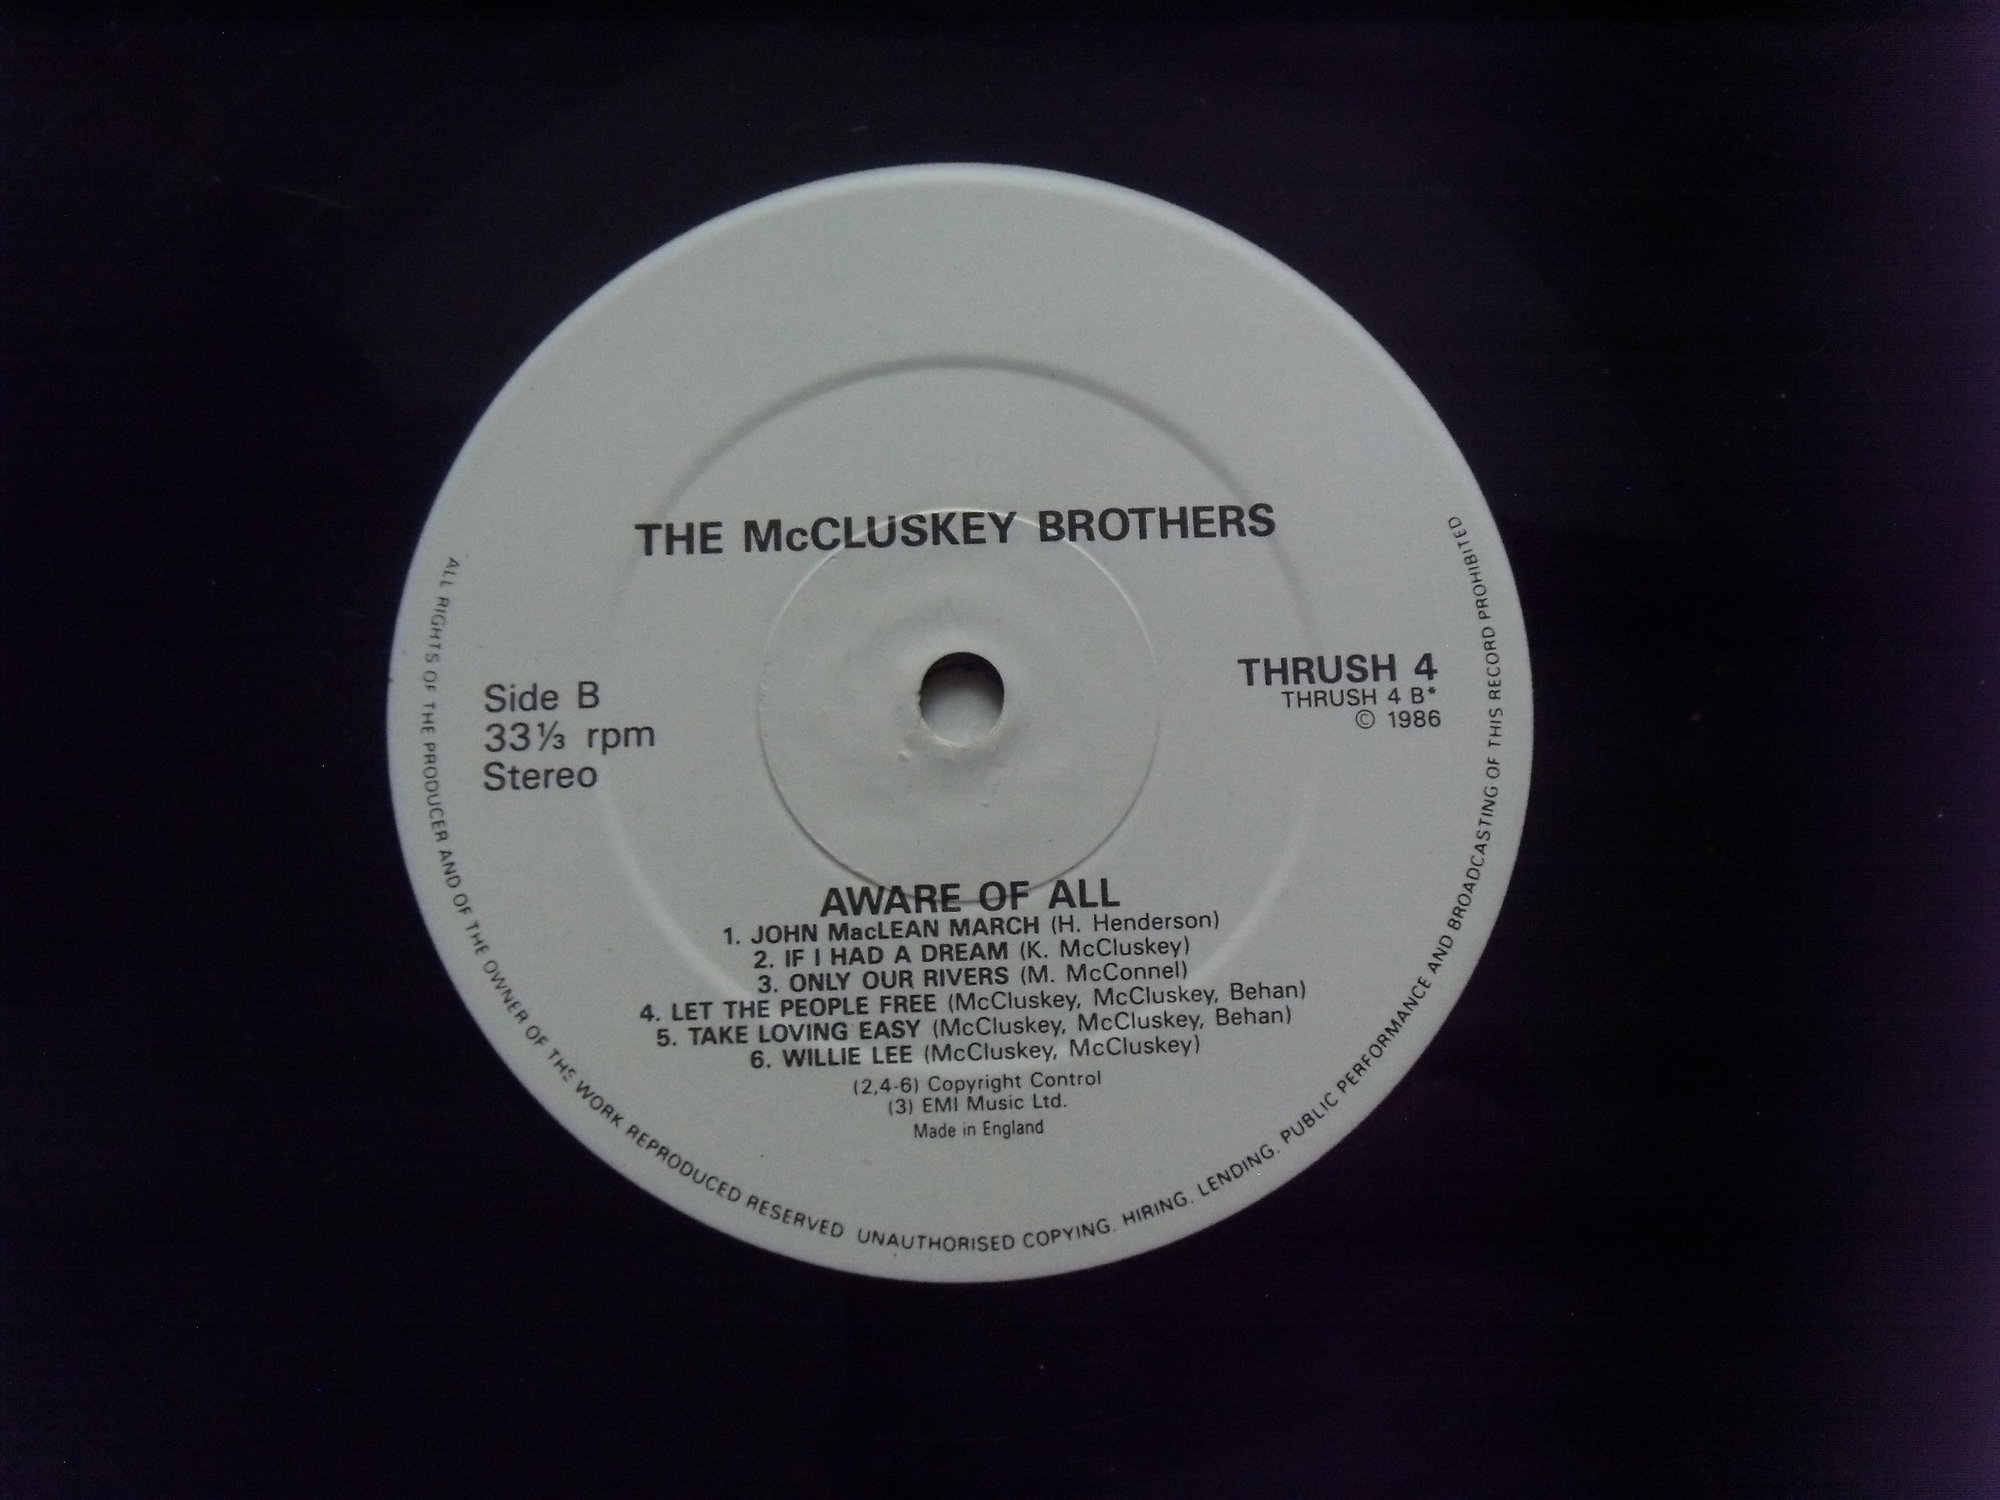 THE MCCLUSKEY BROTHERS Aware of All 4